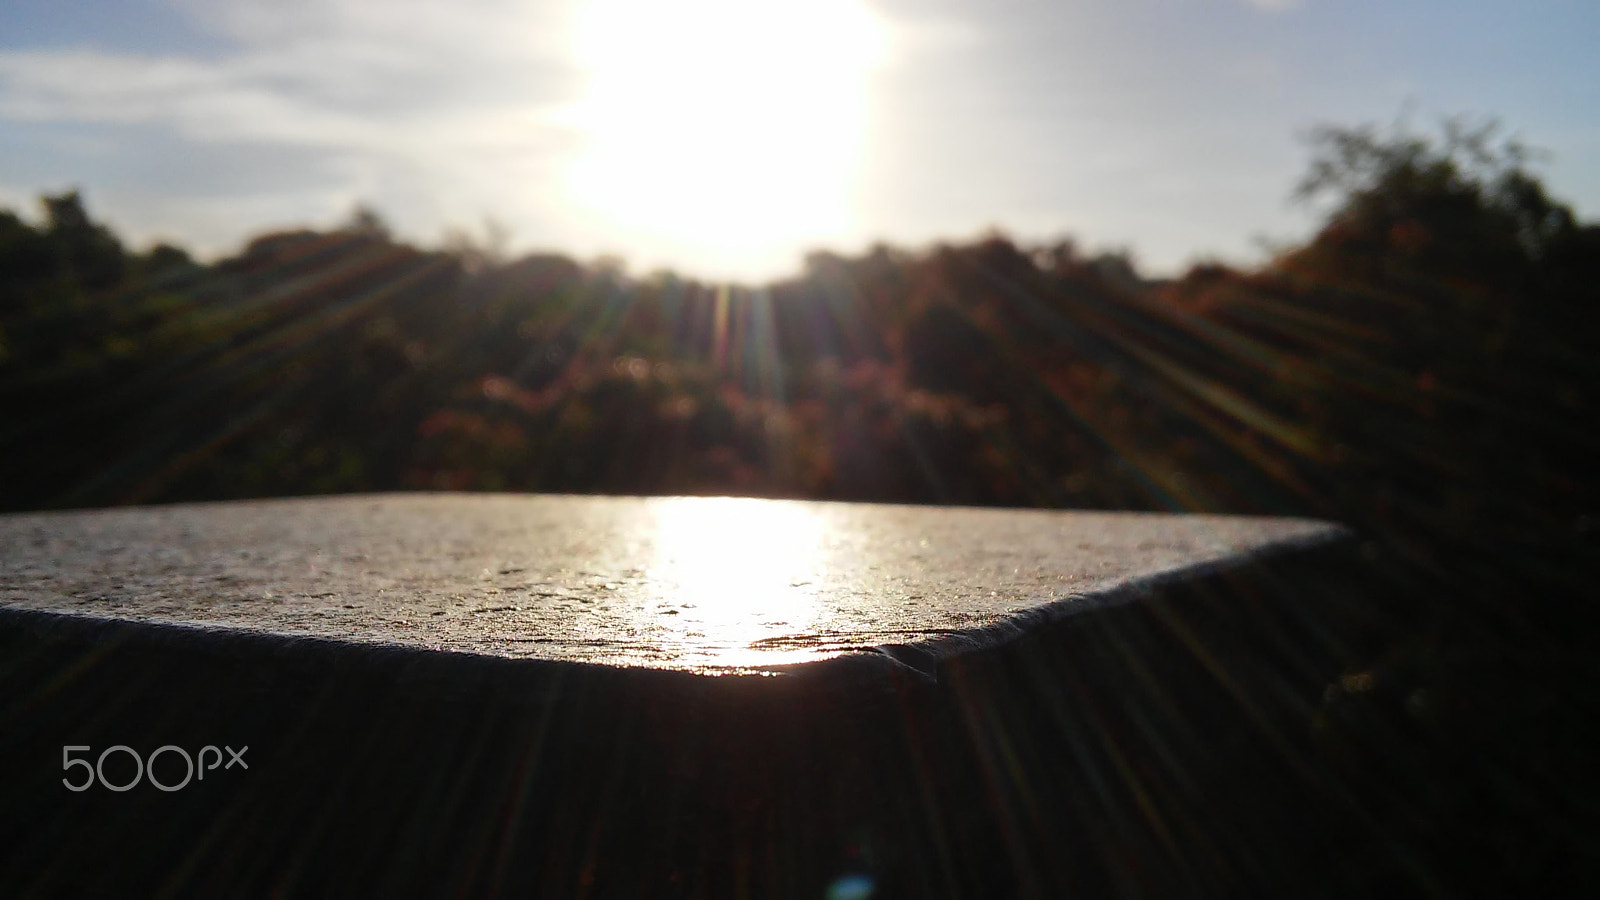 LG G3 S sample photo. The sun over the iron photography